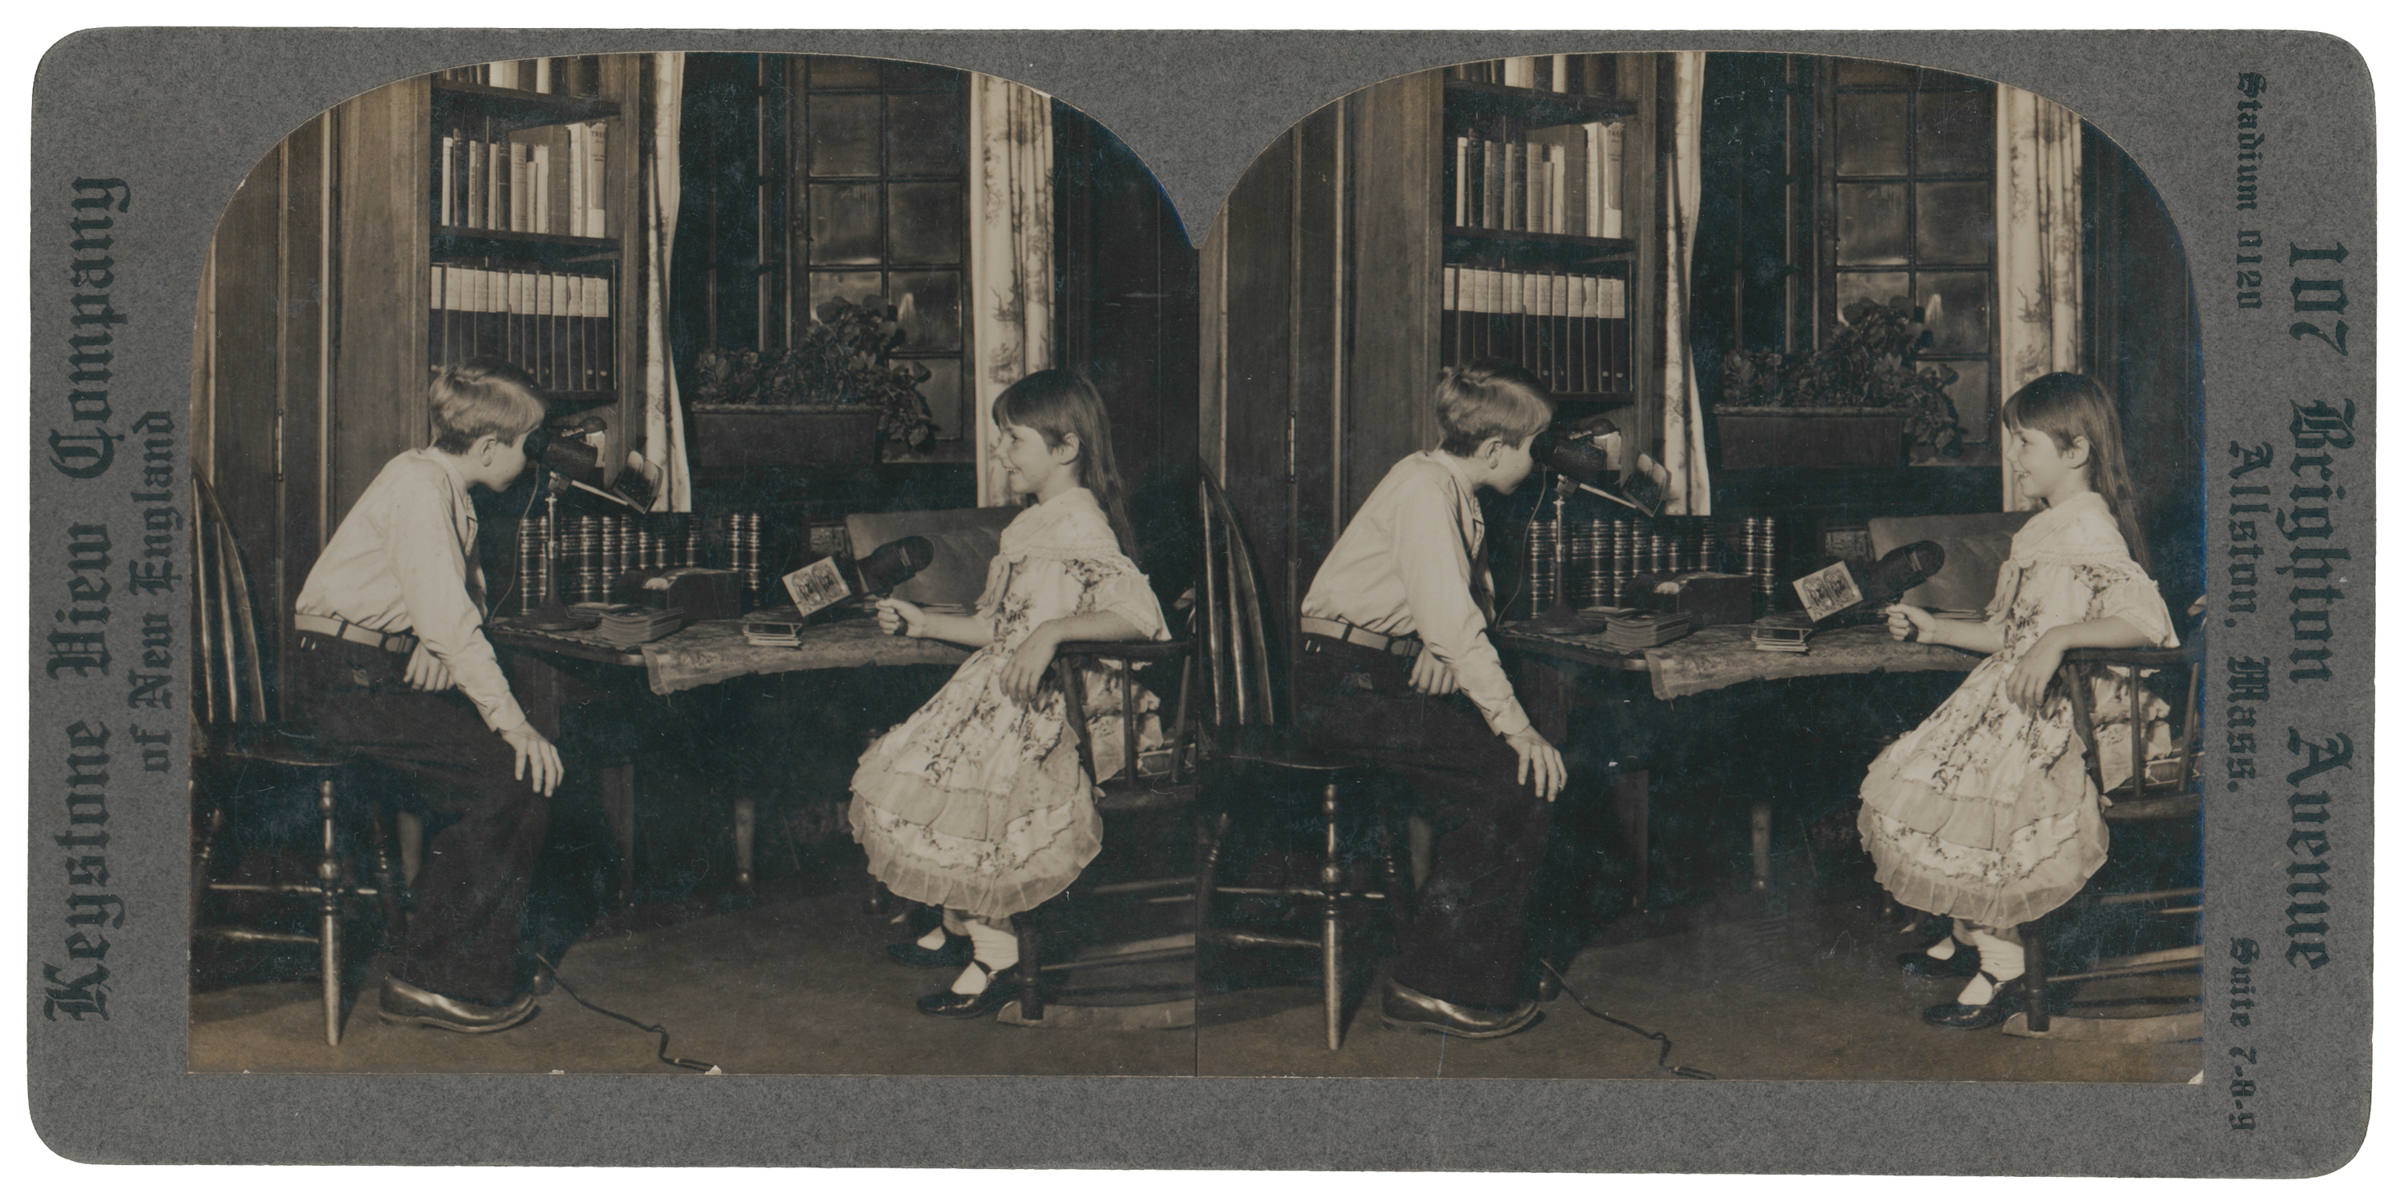 Unidentified photographer, Untitled [Children sitting at a table viewing stereoviews], c1900–15 (albumen prints mounted on card). Courtesy of the Ryerson Image Centre, Gift of Dr. Martin J. Bass and Gail Silverman Bass, 2014